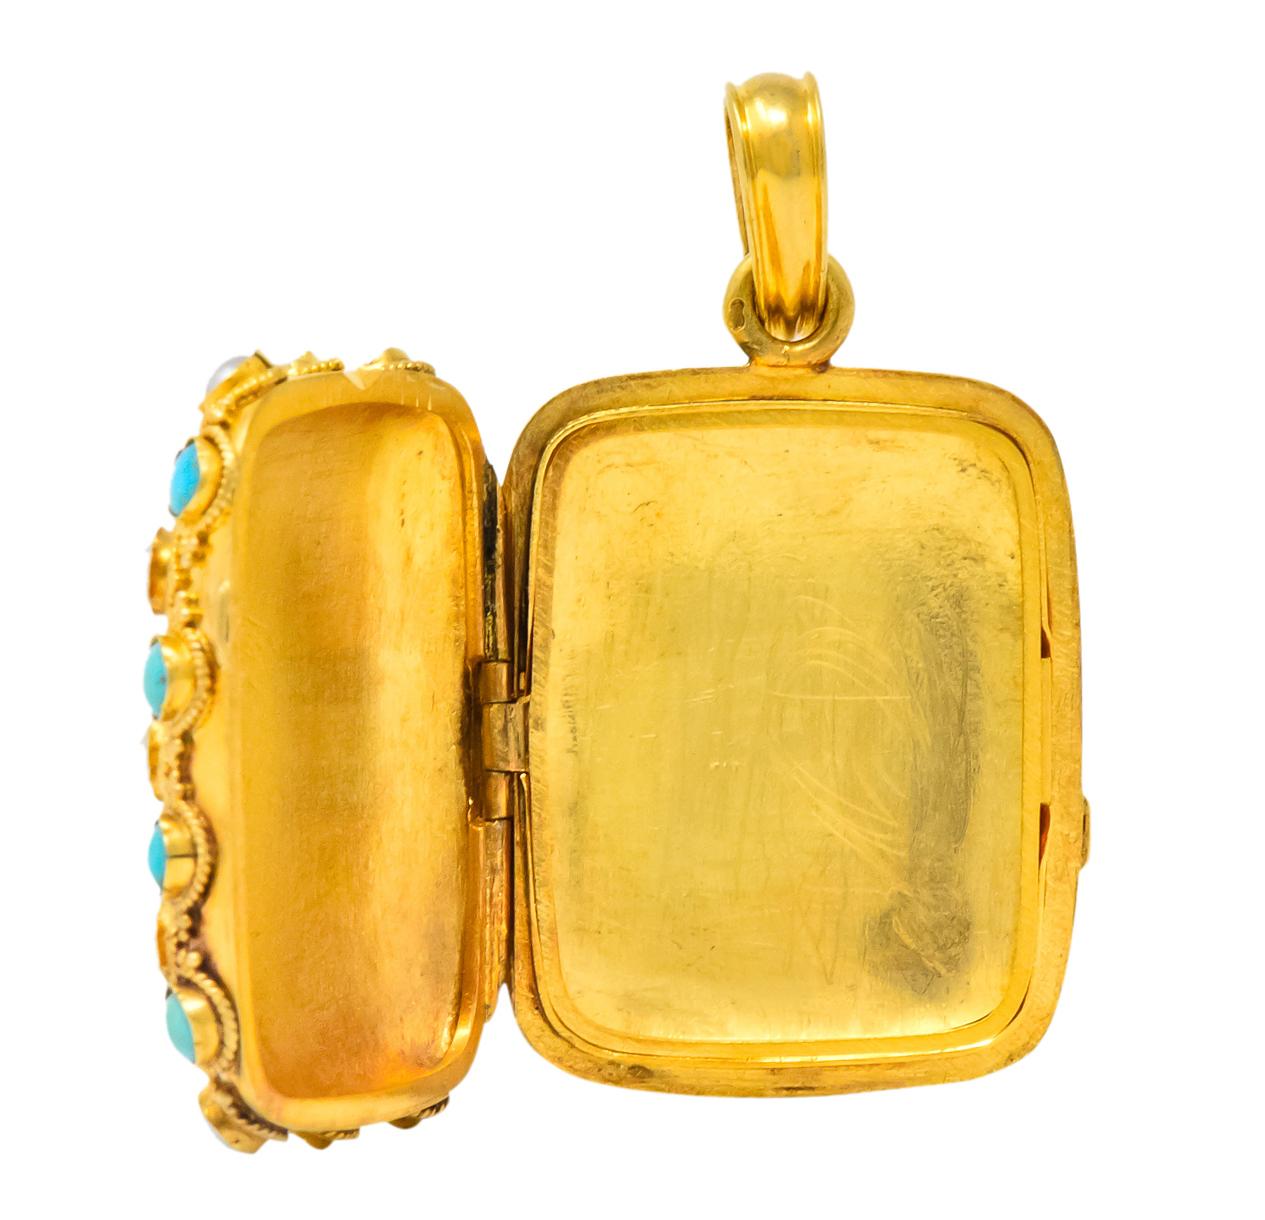 Designed as a rectangular locket with a framed glass panel

Back has satin finish while front is decorated with gold beads and rope motif surrounding bezel set turquoise and pearls

Turquoise are round cabochons measuring approximately 2.8 mm,